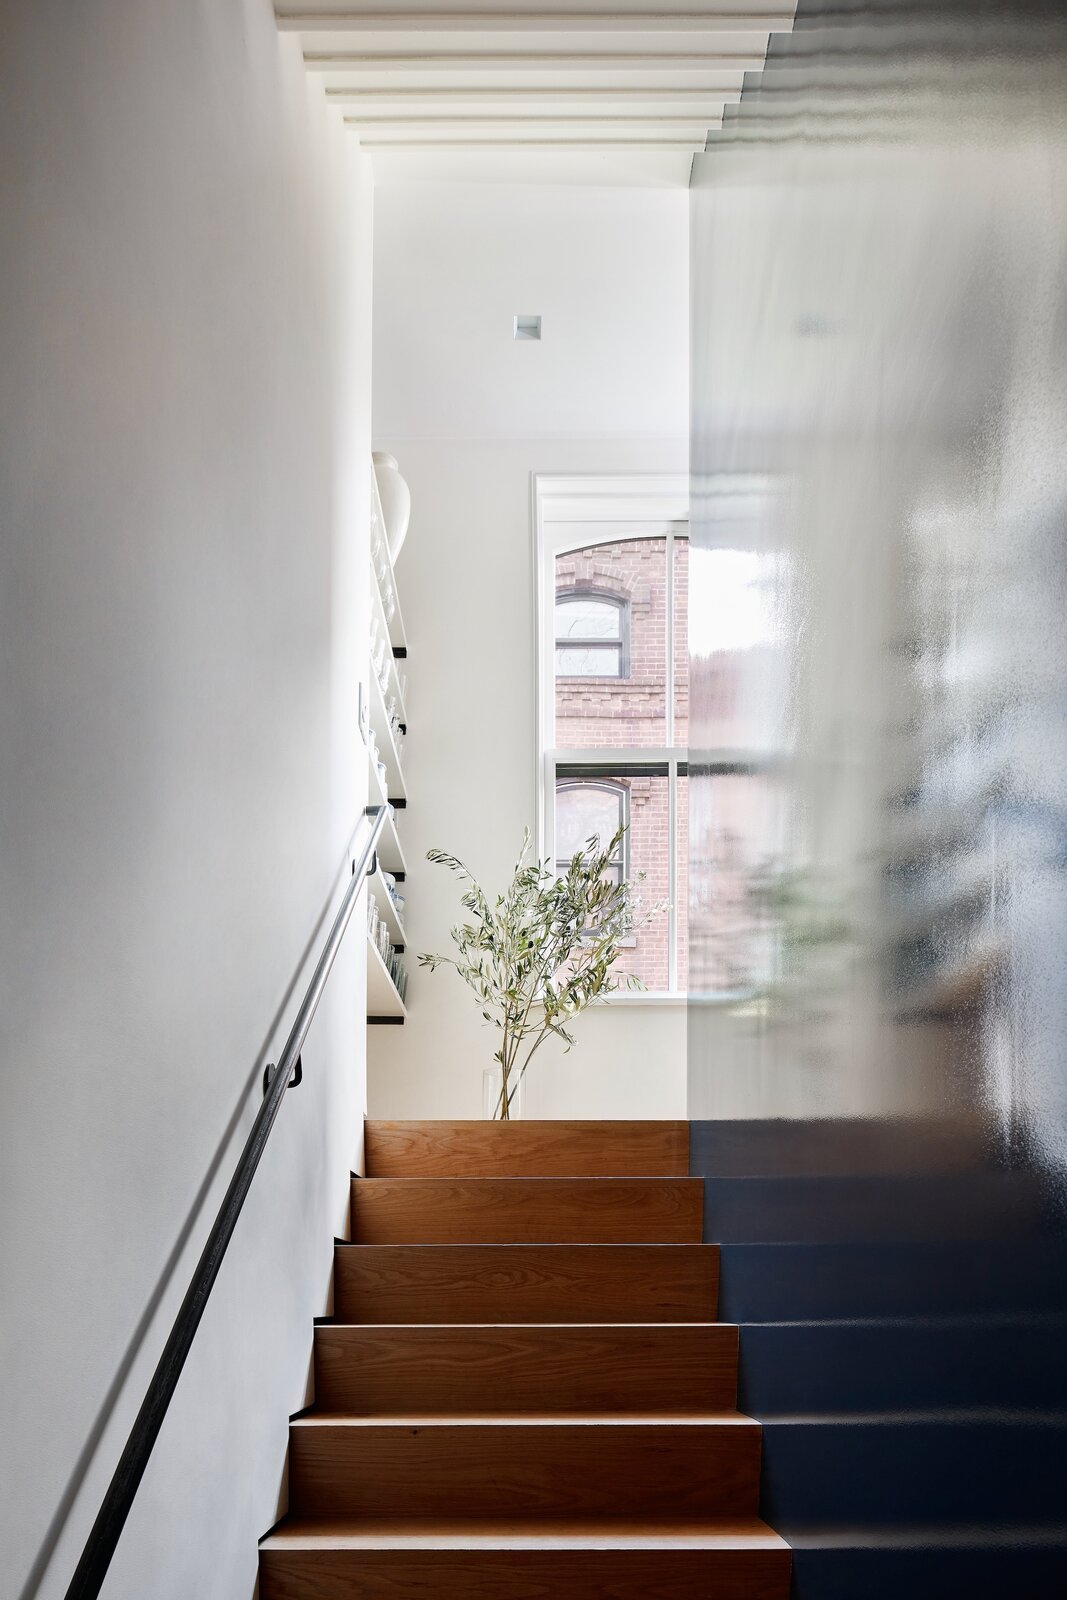  The stairs are hidden behind a core wood block with a high gloss finish for a mirror-like reflection. Fortuitously, there is a window at the top of each run. "They're not perfectly aligned with the stairs, but they bring light down at every level," 